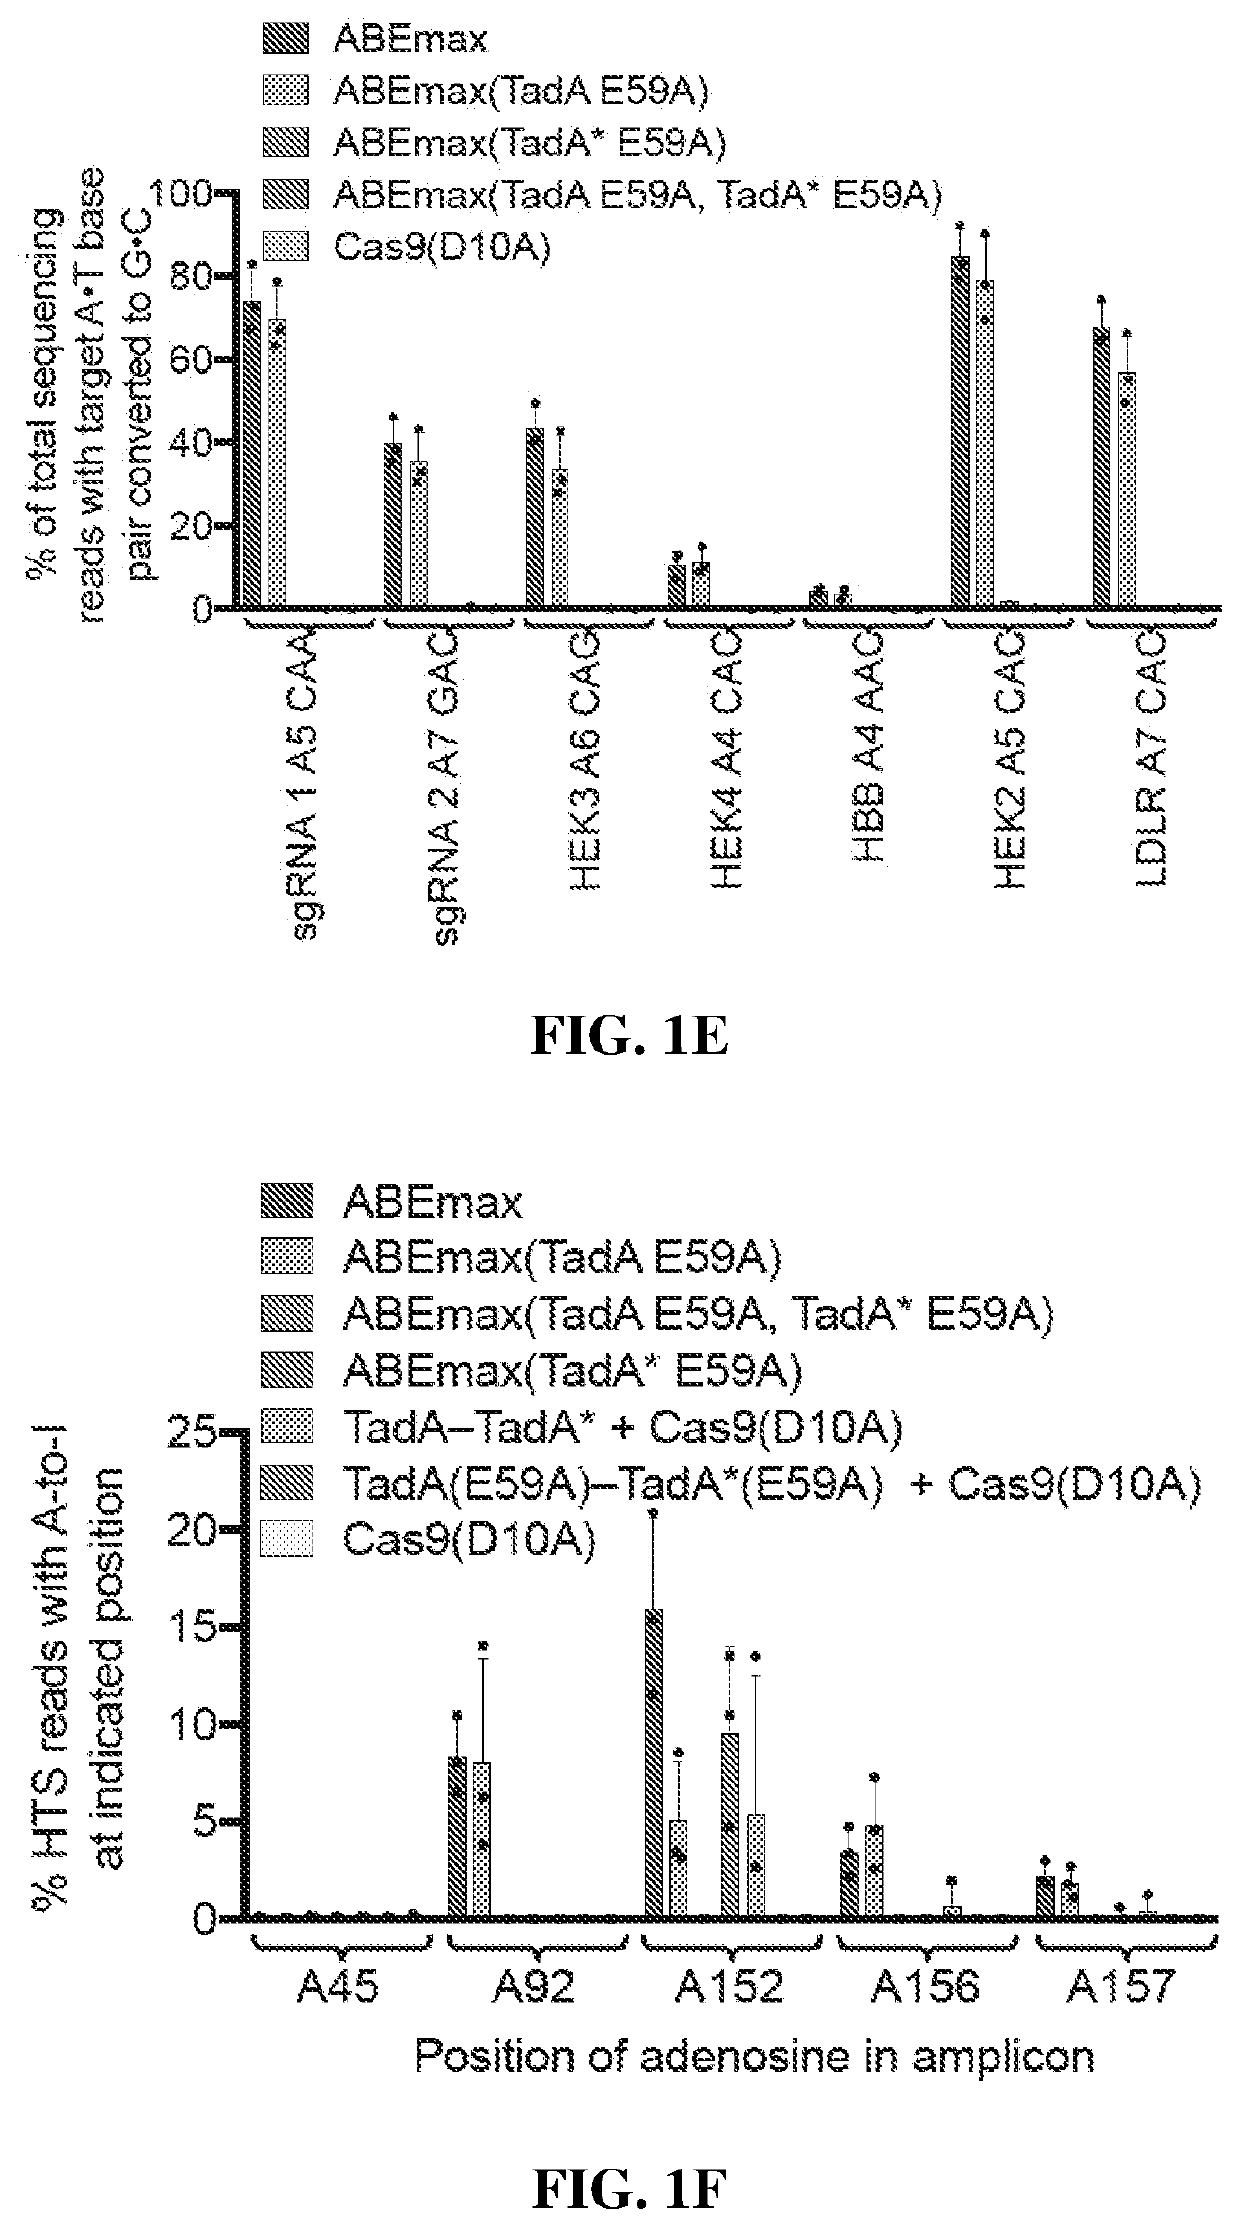 Adenine base editors with reduced off-target effects